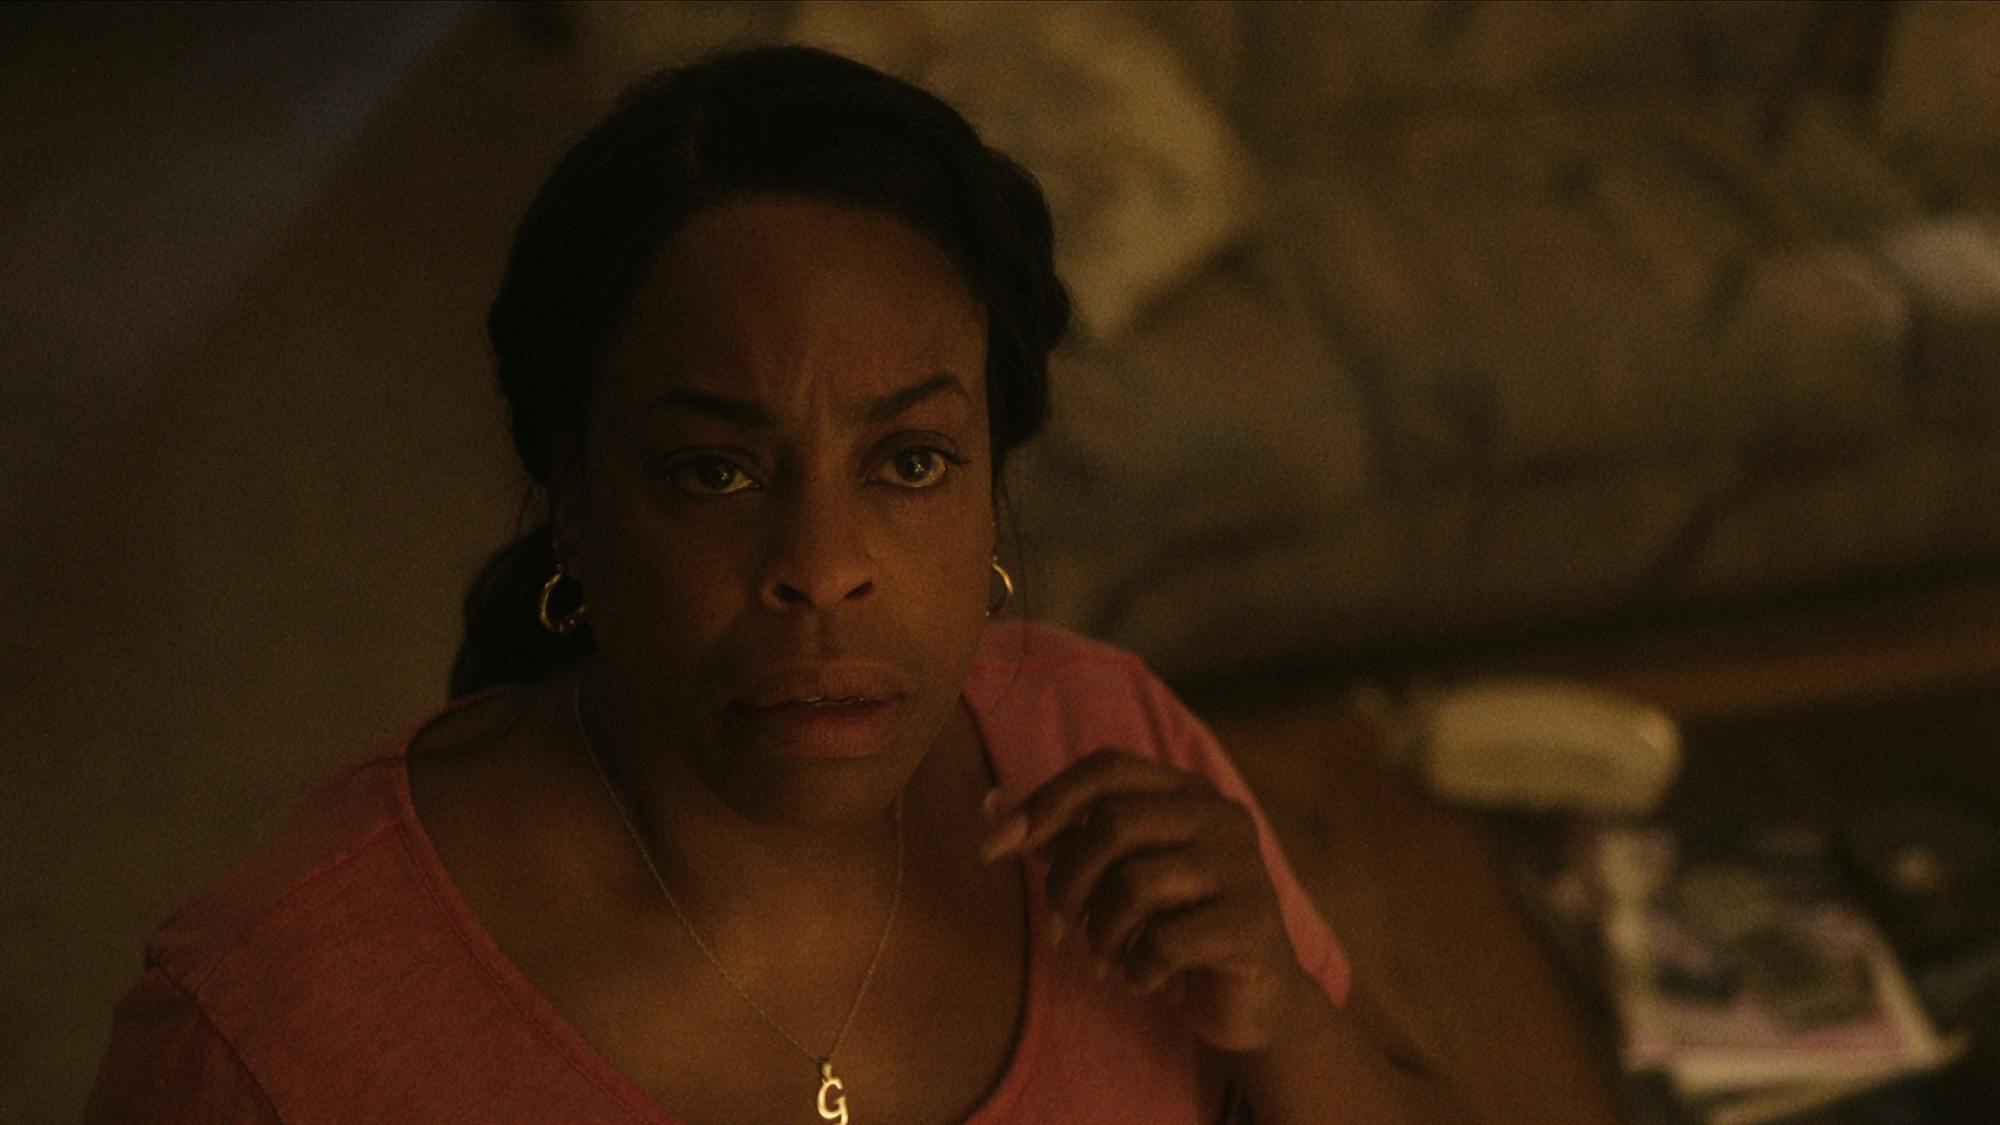 Glenda Cleveland (Niecy Nash-Betts) wears a pink top and gold necklace and looks afraid.